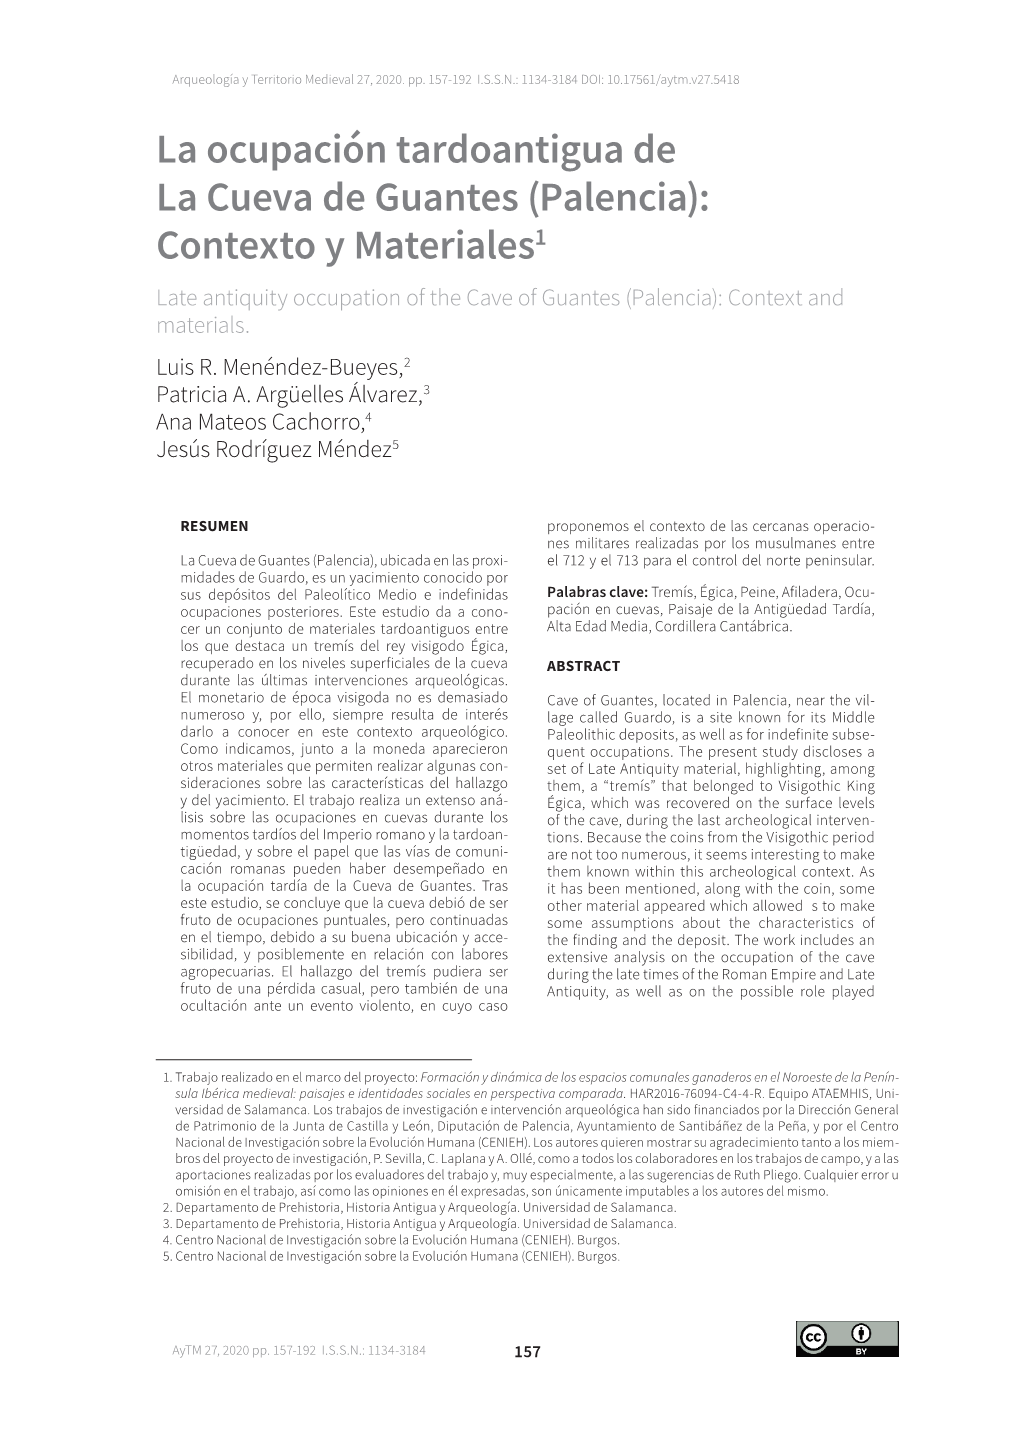 Palencia): Contexto Y Materiales1 Late Antiquity Occupation of the Cave of Guantes (Palencia): Context and Materials